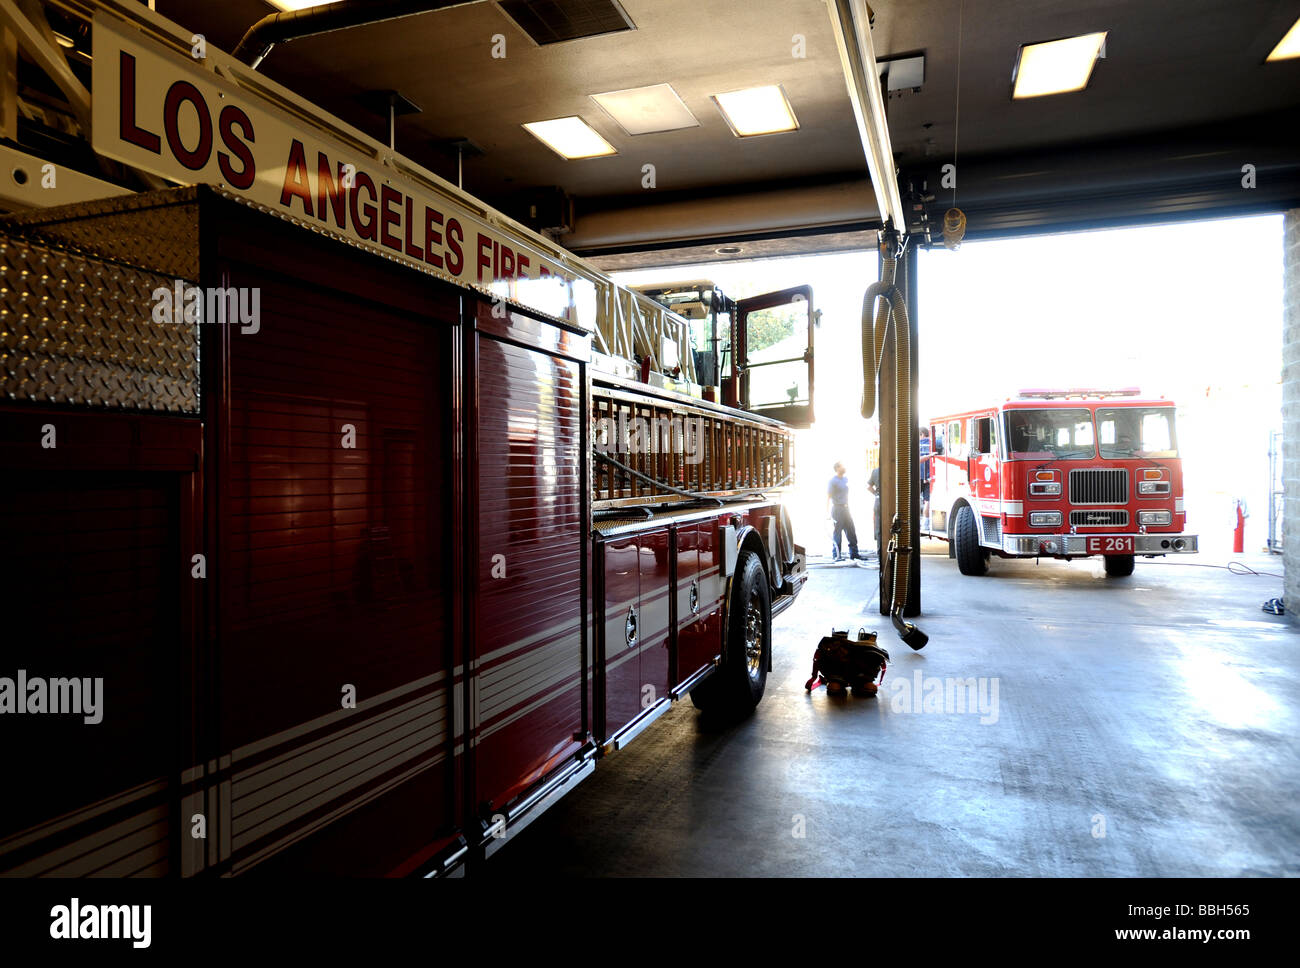 Los Angeles Fire Department California Stock Photo